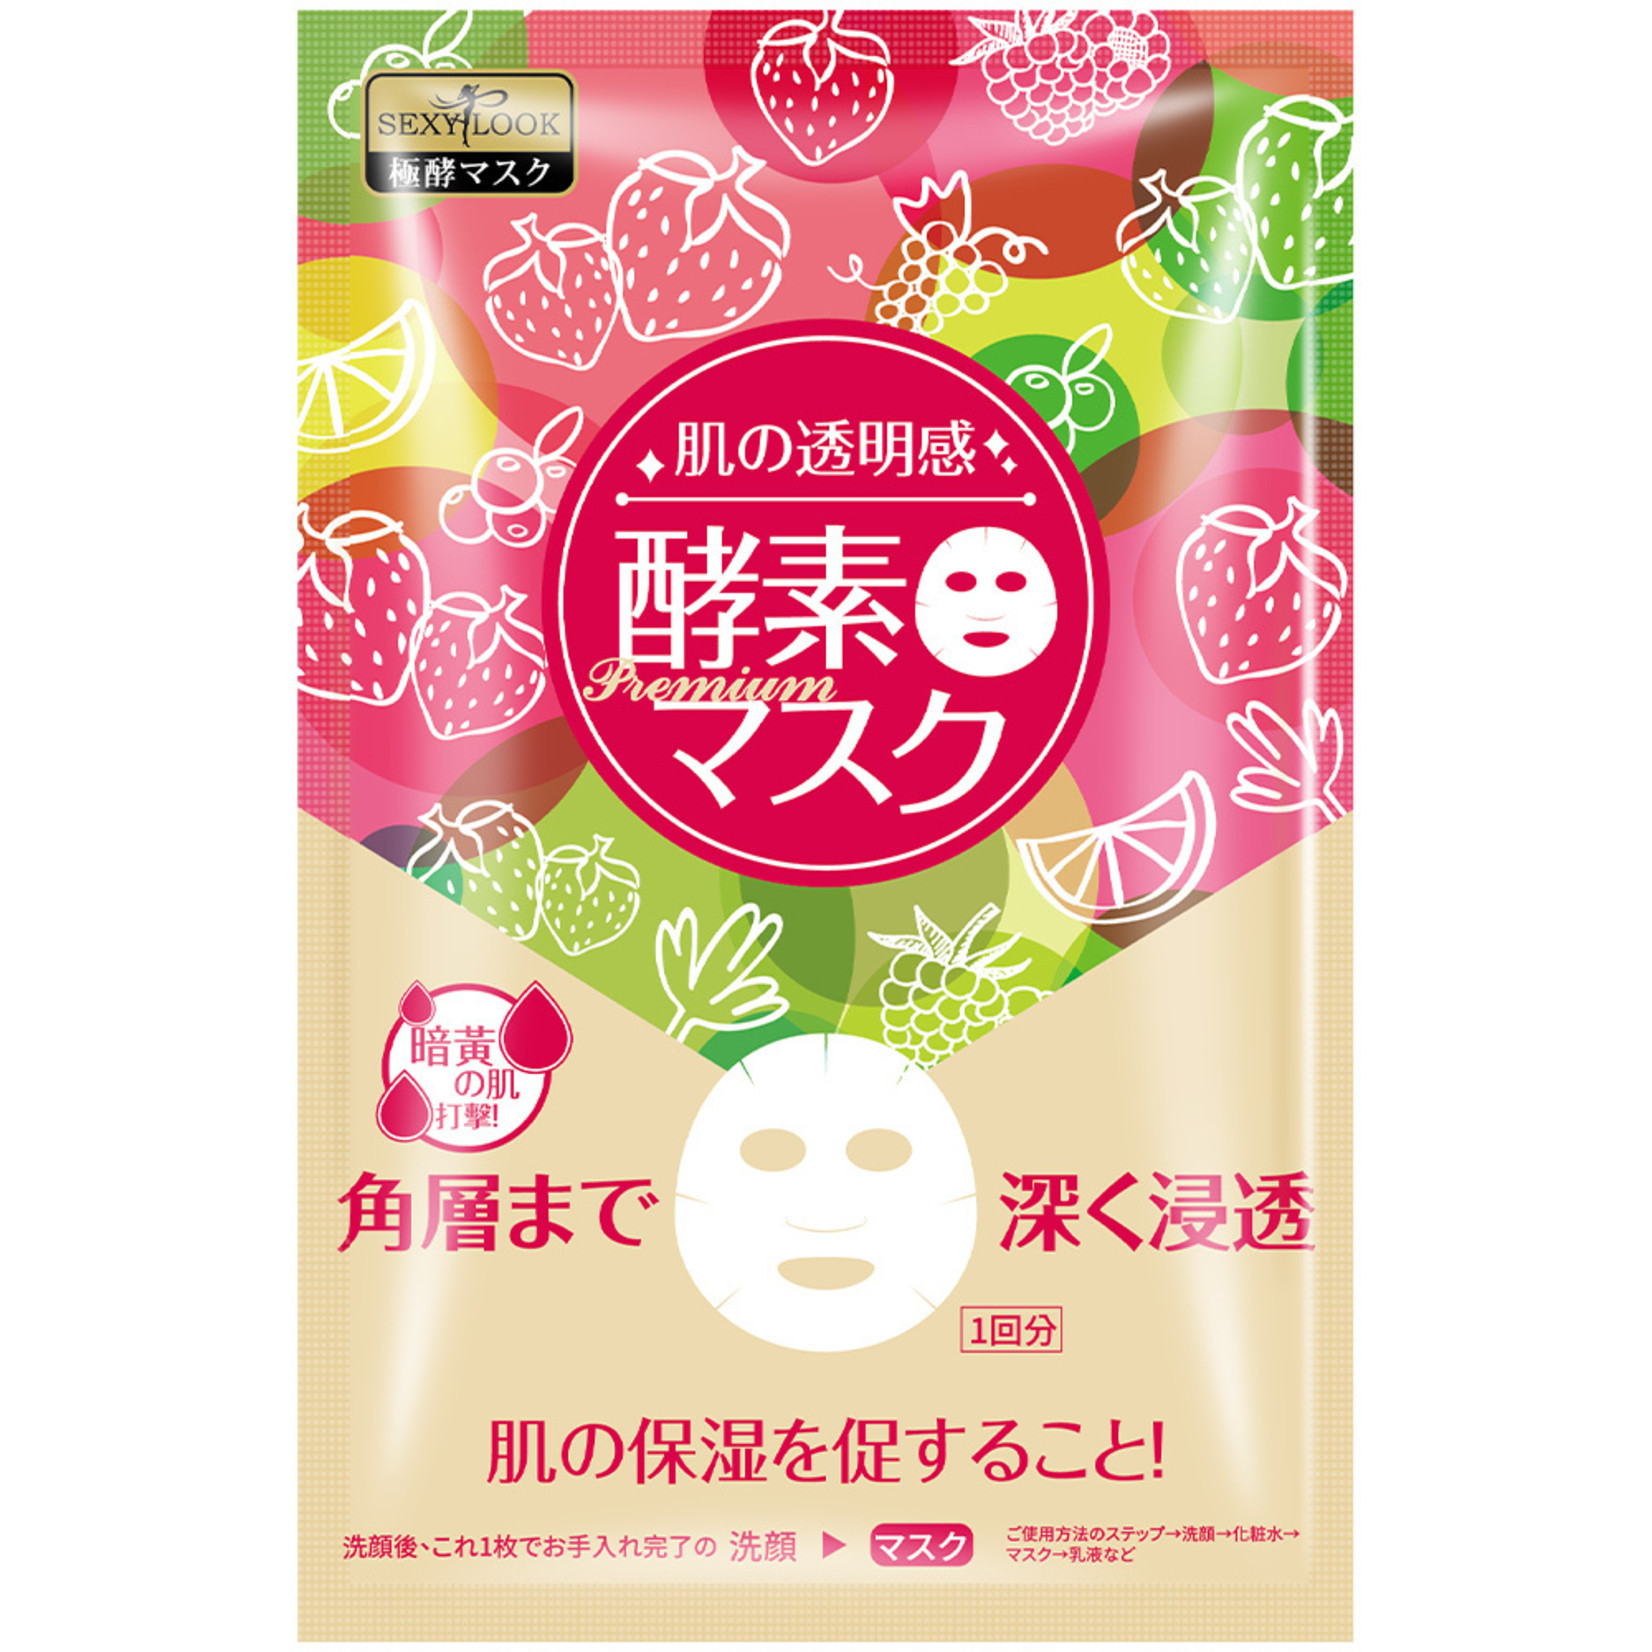 SEXYLOOK Enzyme Intensive Hydrating Facial Mask